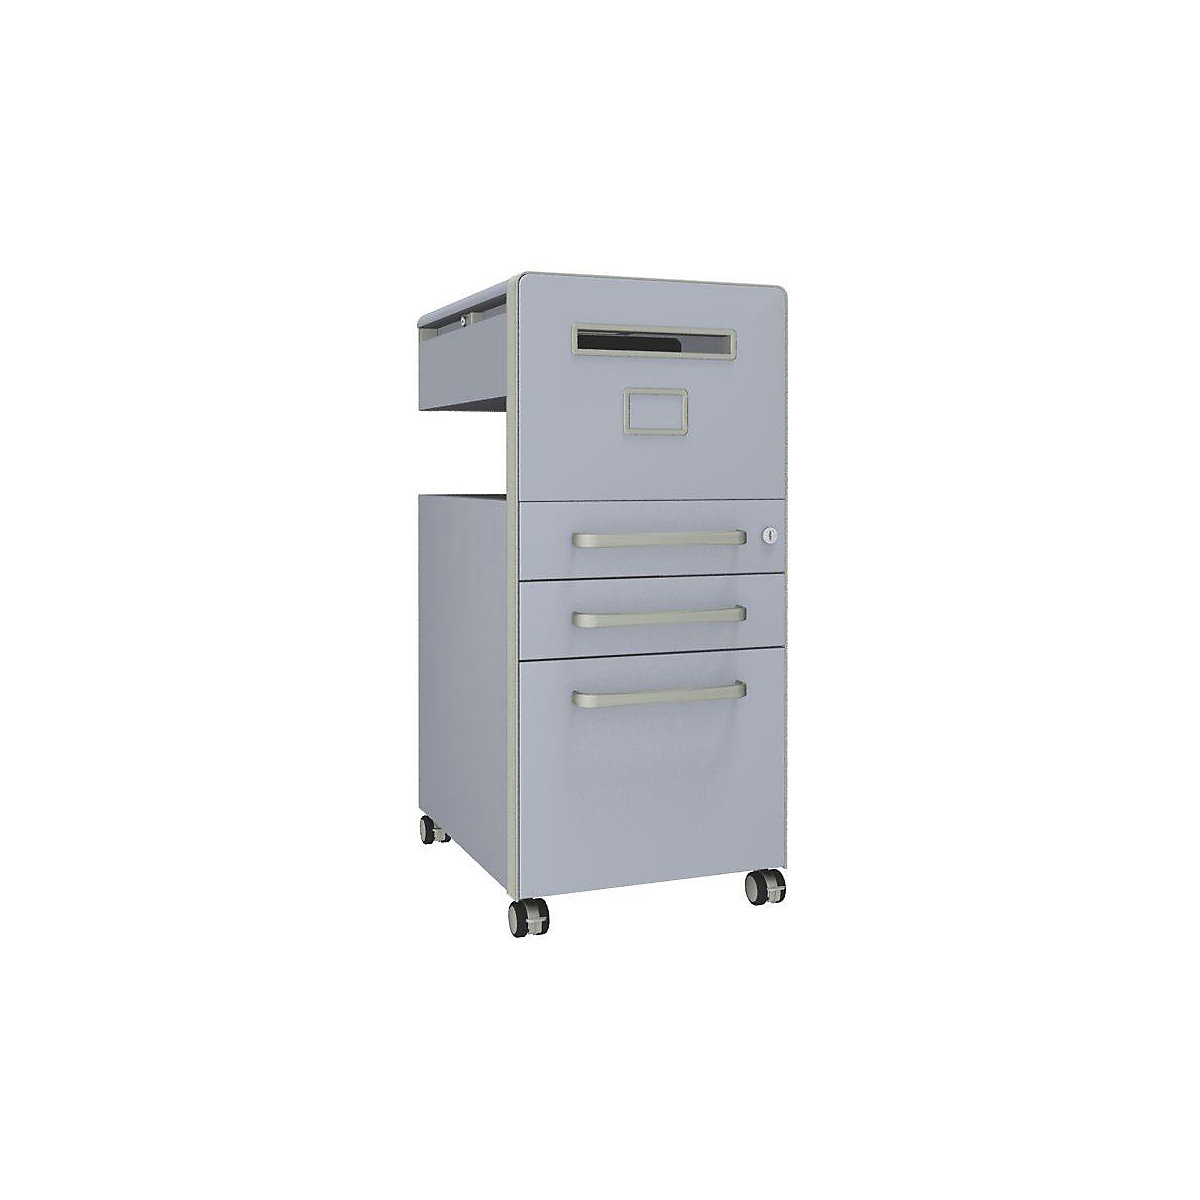 Bite™ pedestal furniture, with 1 pin board, opens on the right side - BISLEY